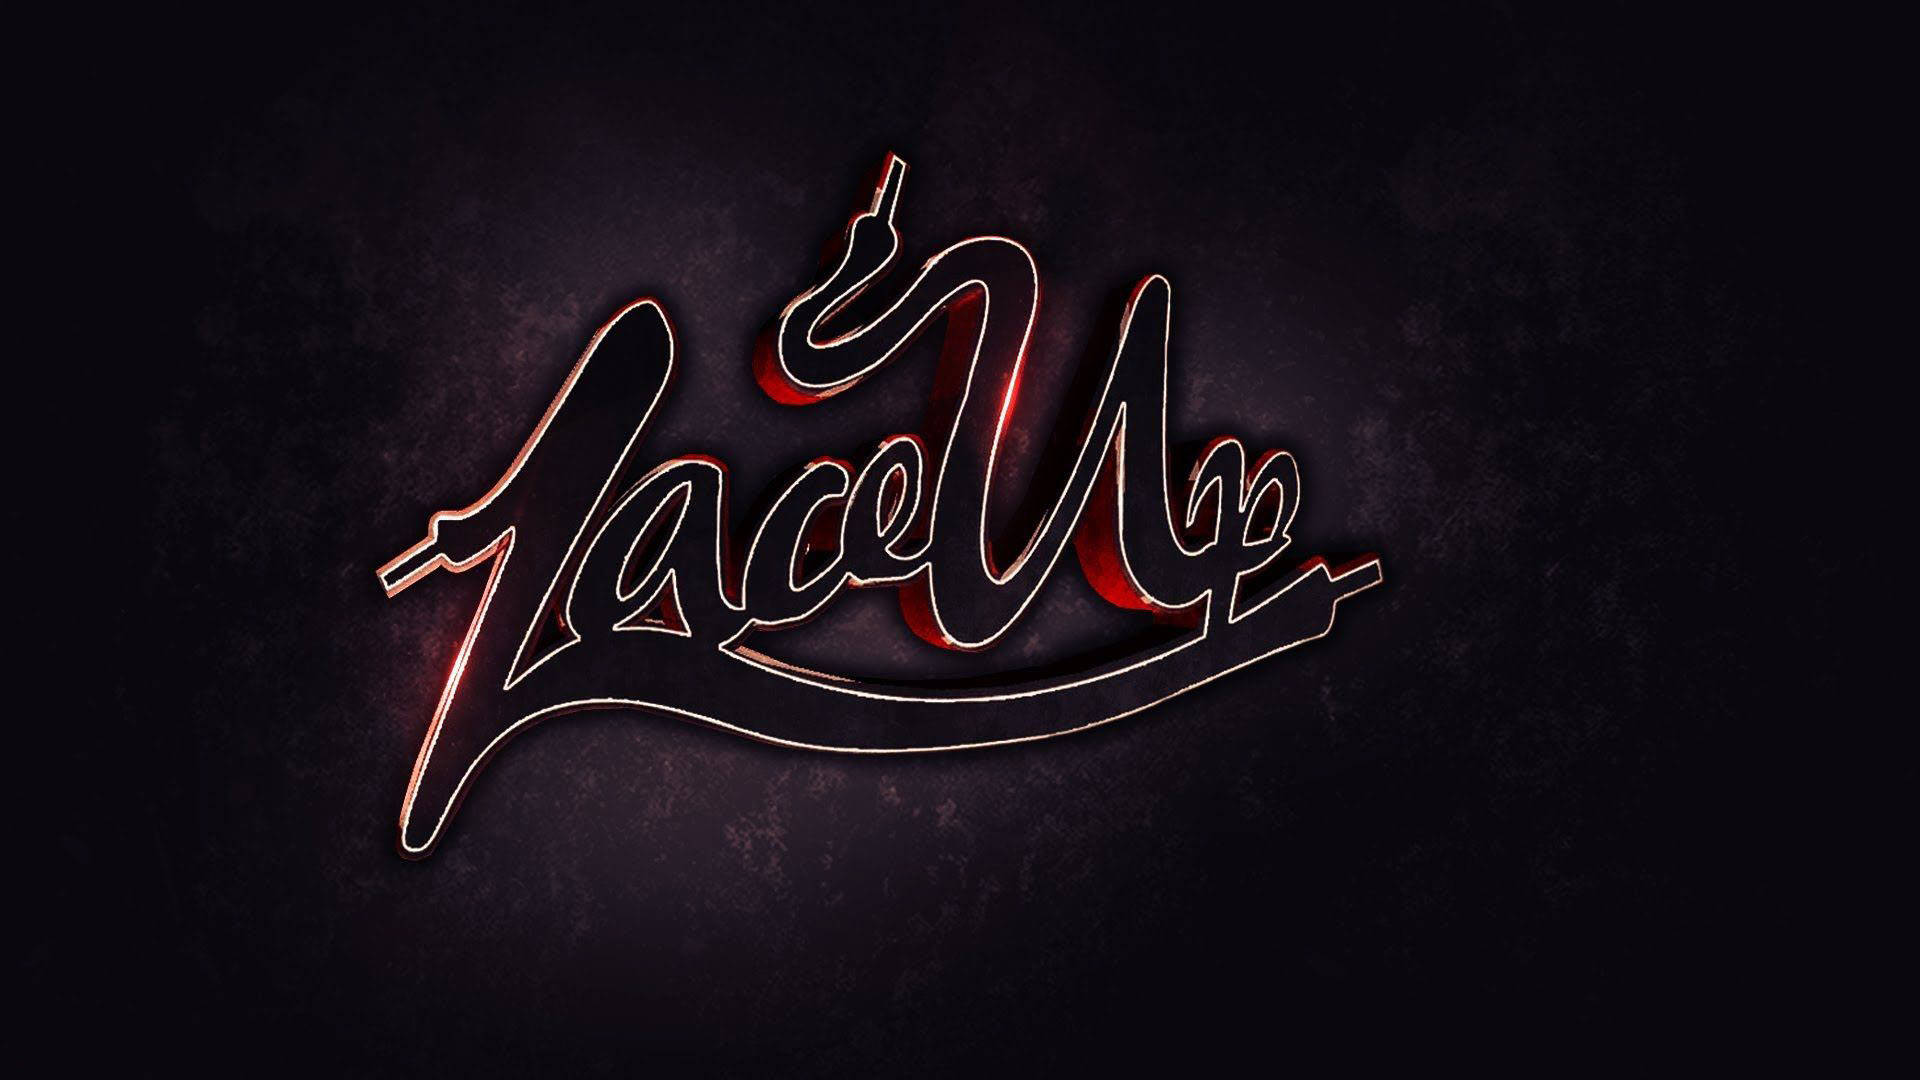 Glowing Lace Up Logo On A Black Background Background